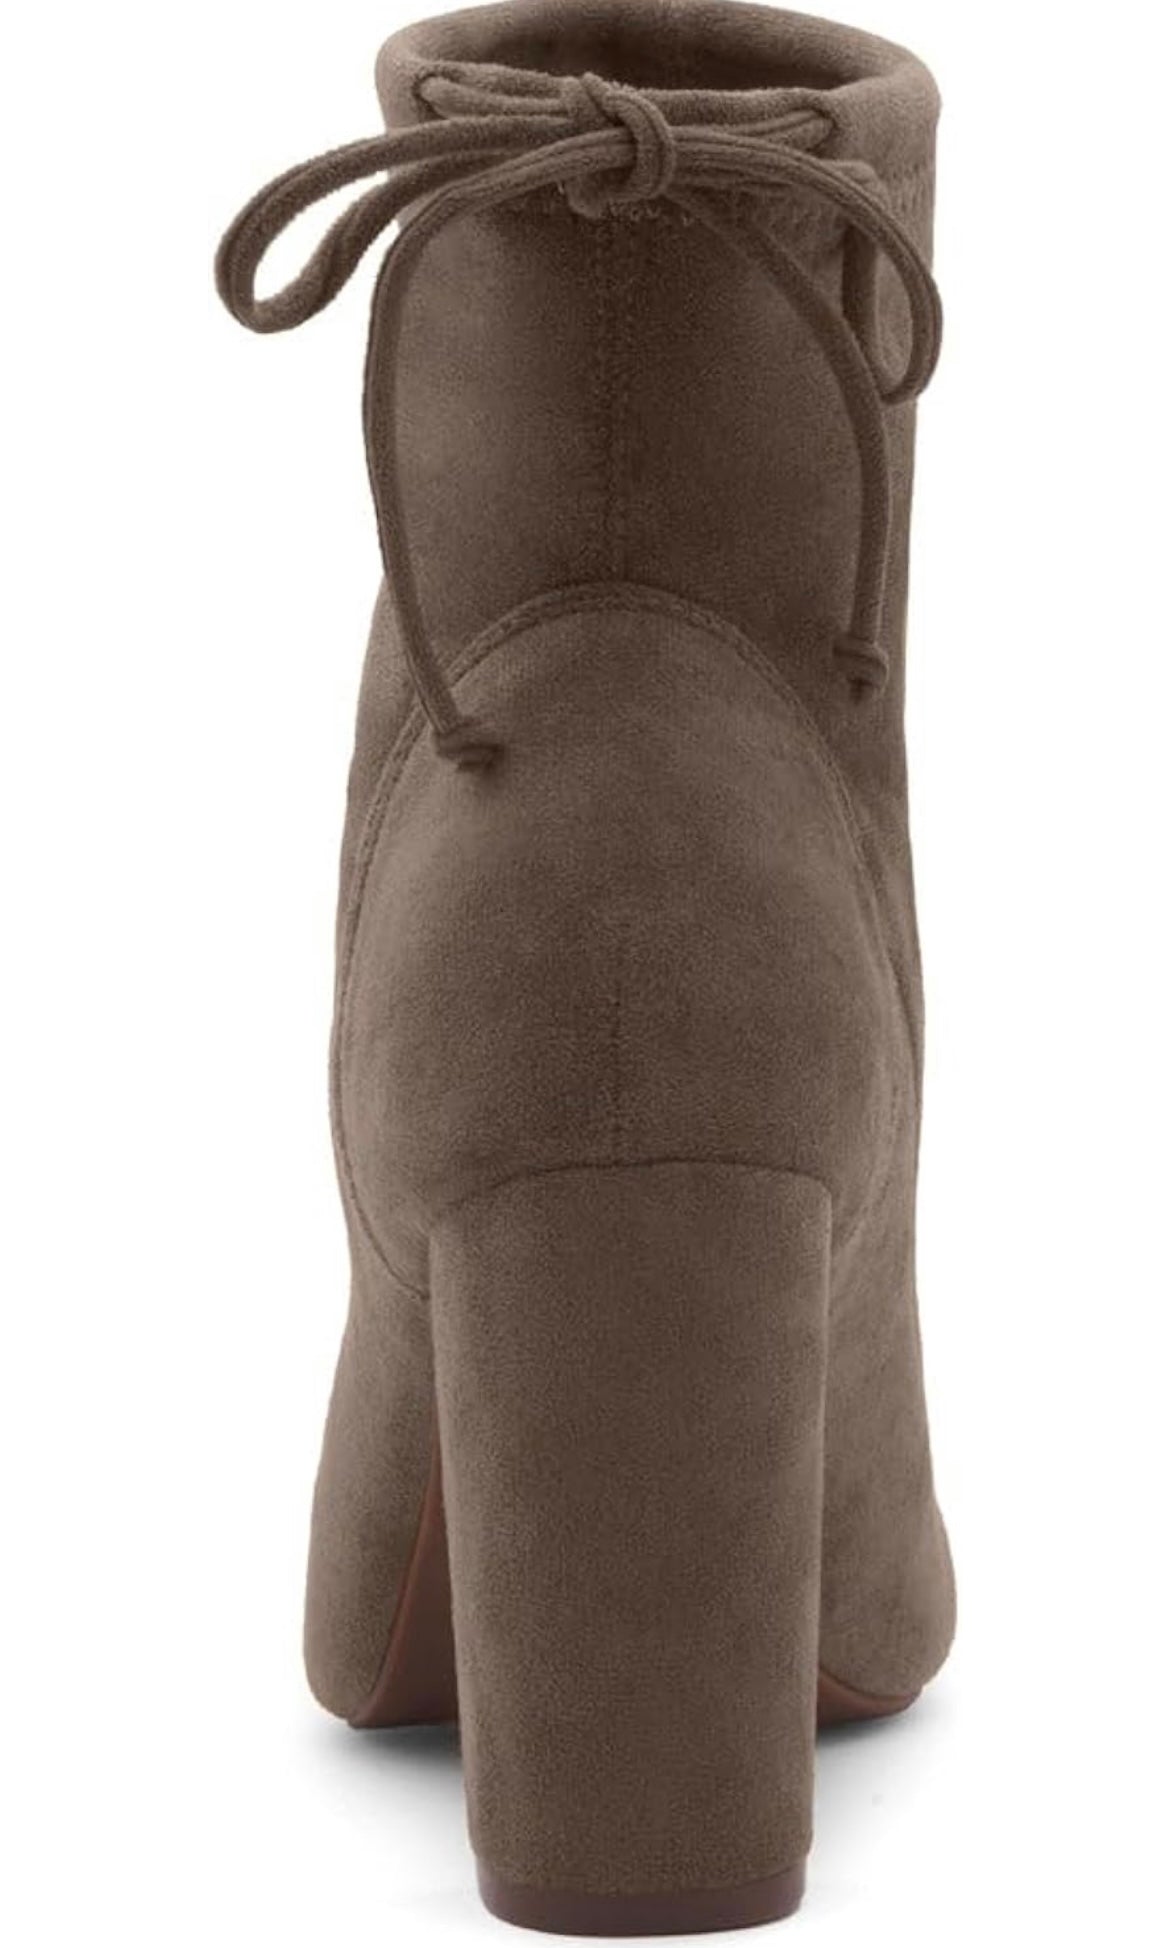 Ankle Tie Bootie - Taupe